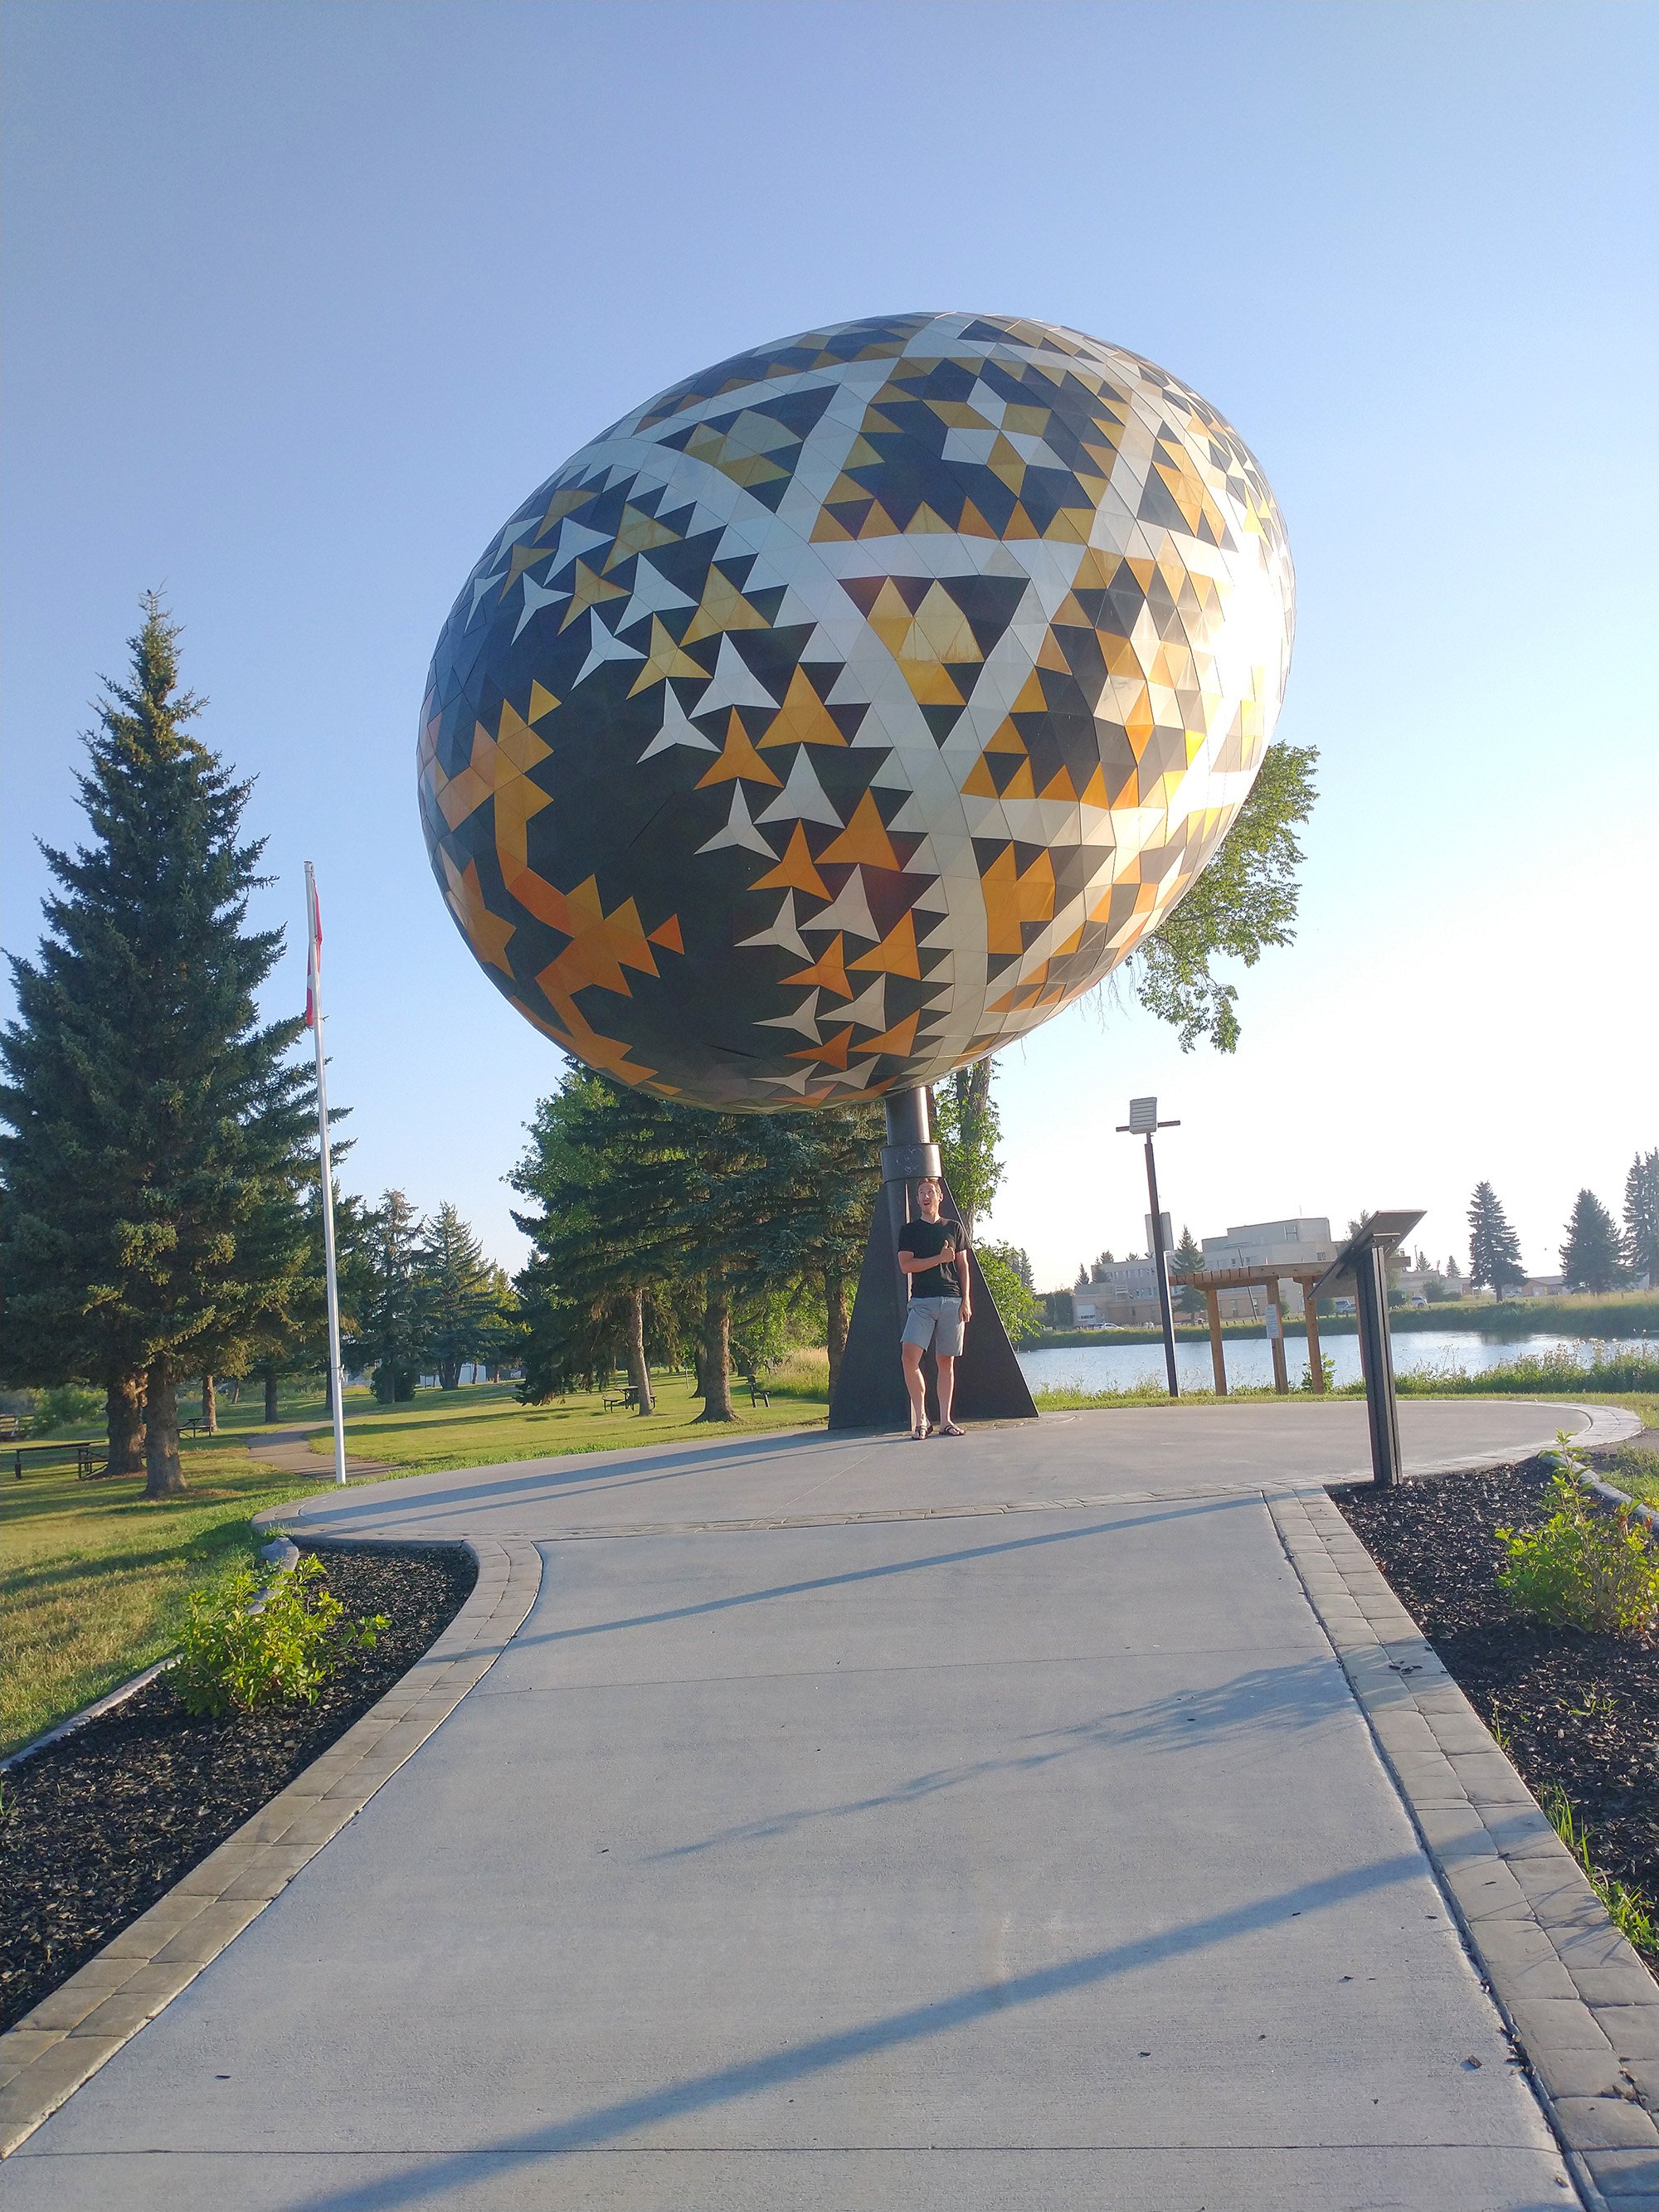 Started the morning in Vegreville, home of the largest Pyanka. Some kind of Ukraine thing I dunno.